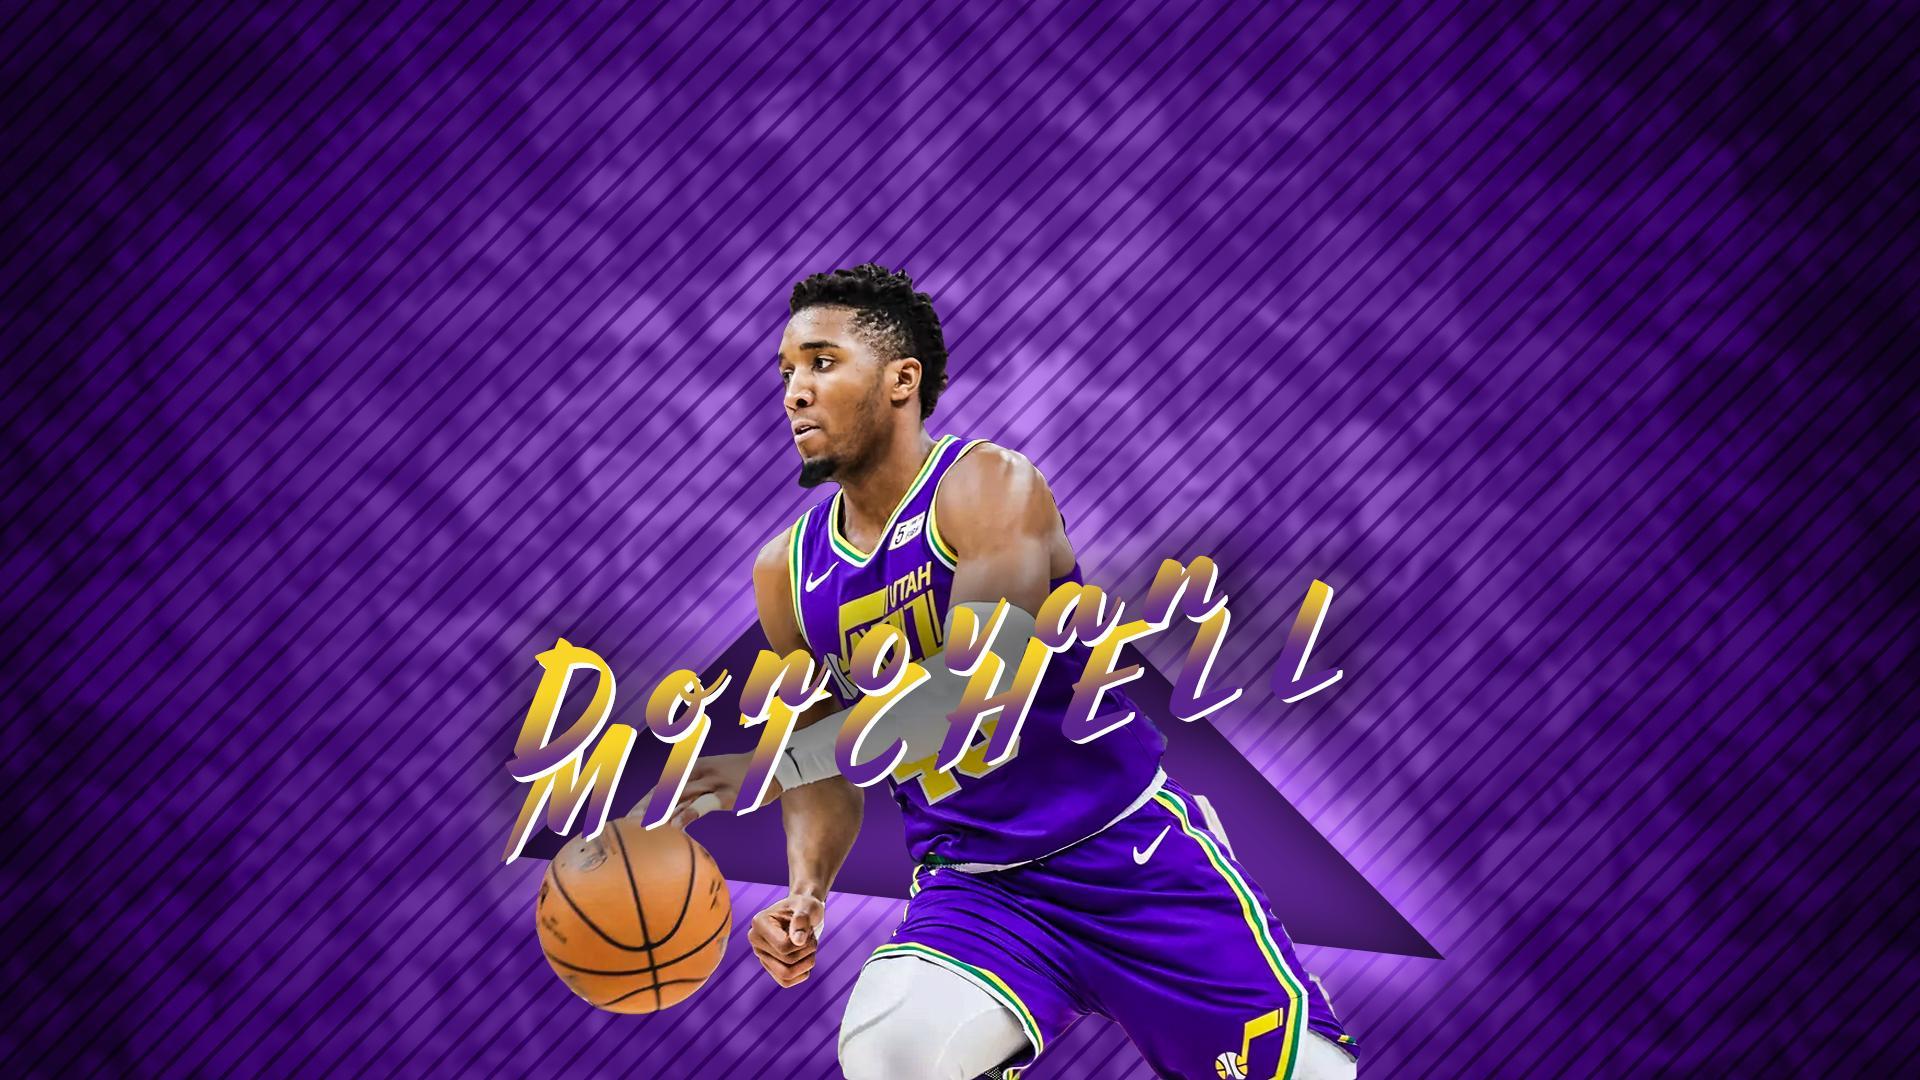 Update more than 73 donovan mitchell wallpaper cavs best - in.cdgdbentre